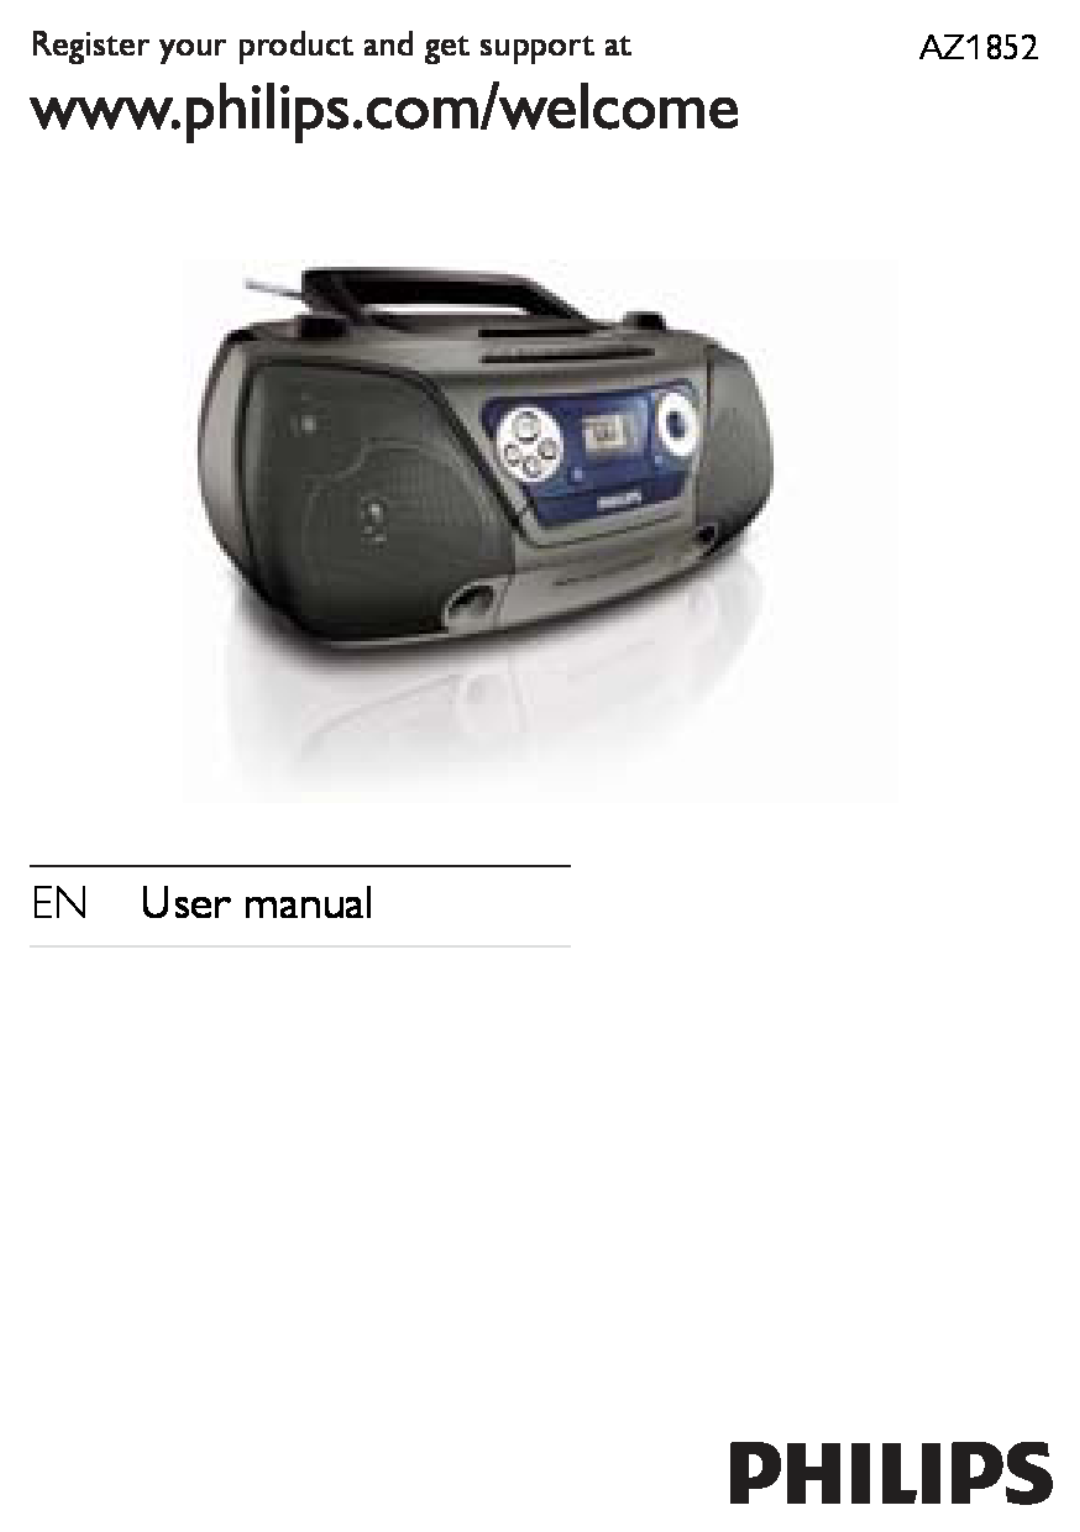 Philips AZ1852 user manual Register your product and get support at 